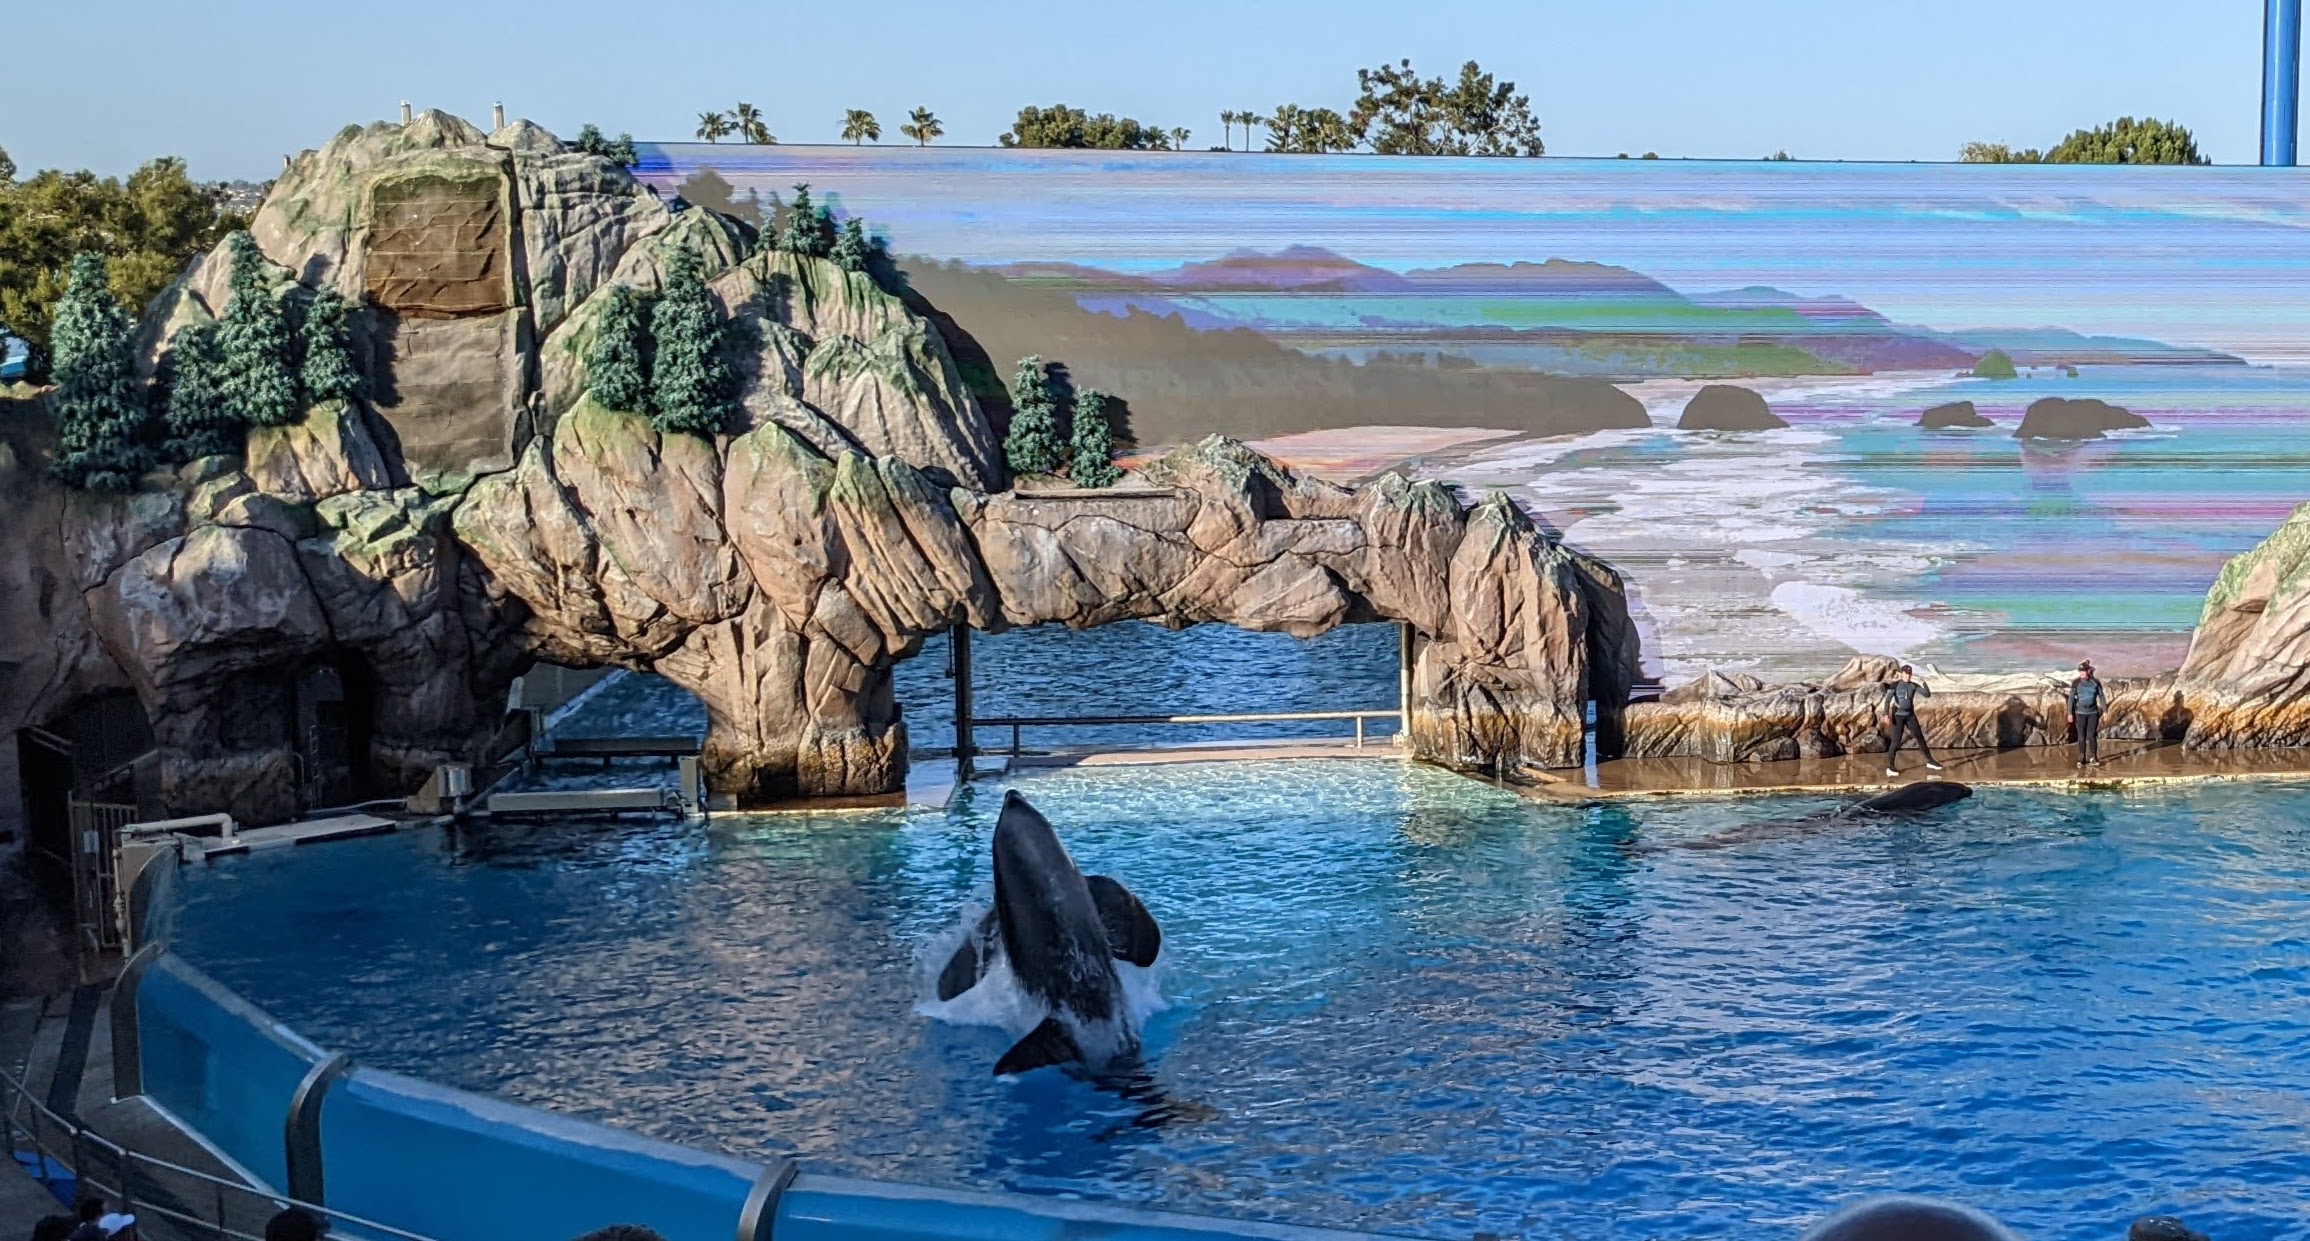 Orca jumping during a show at SeaWorld San Diego.